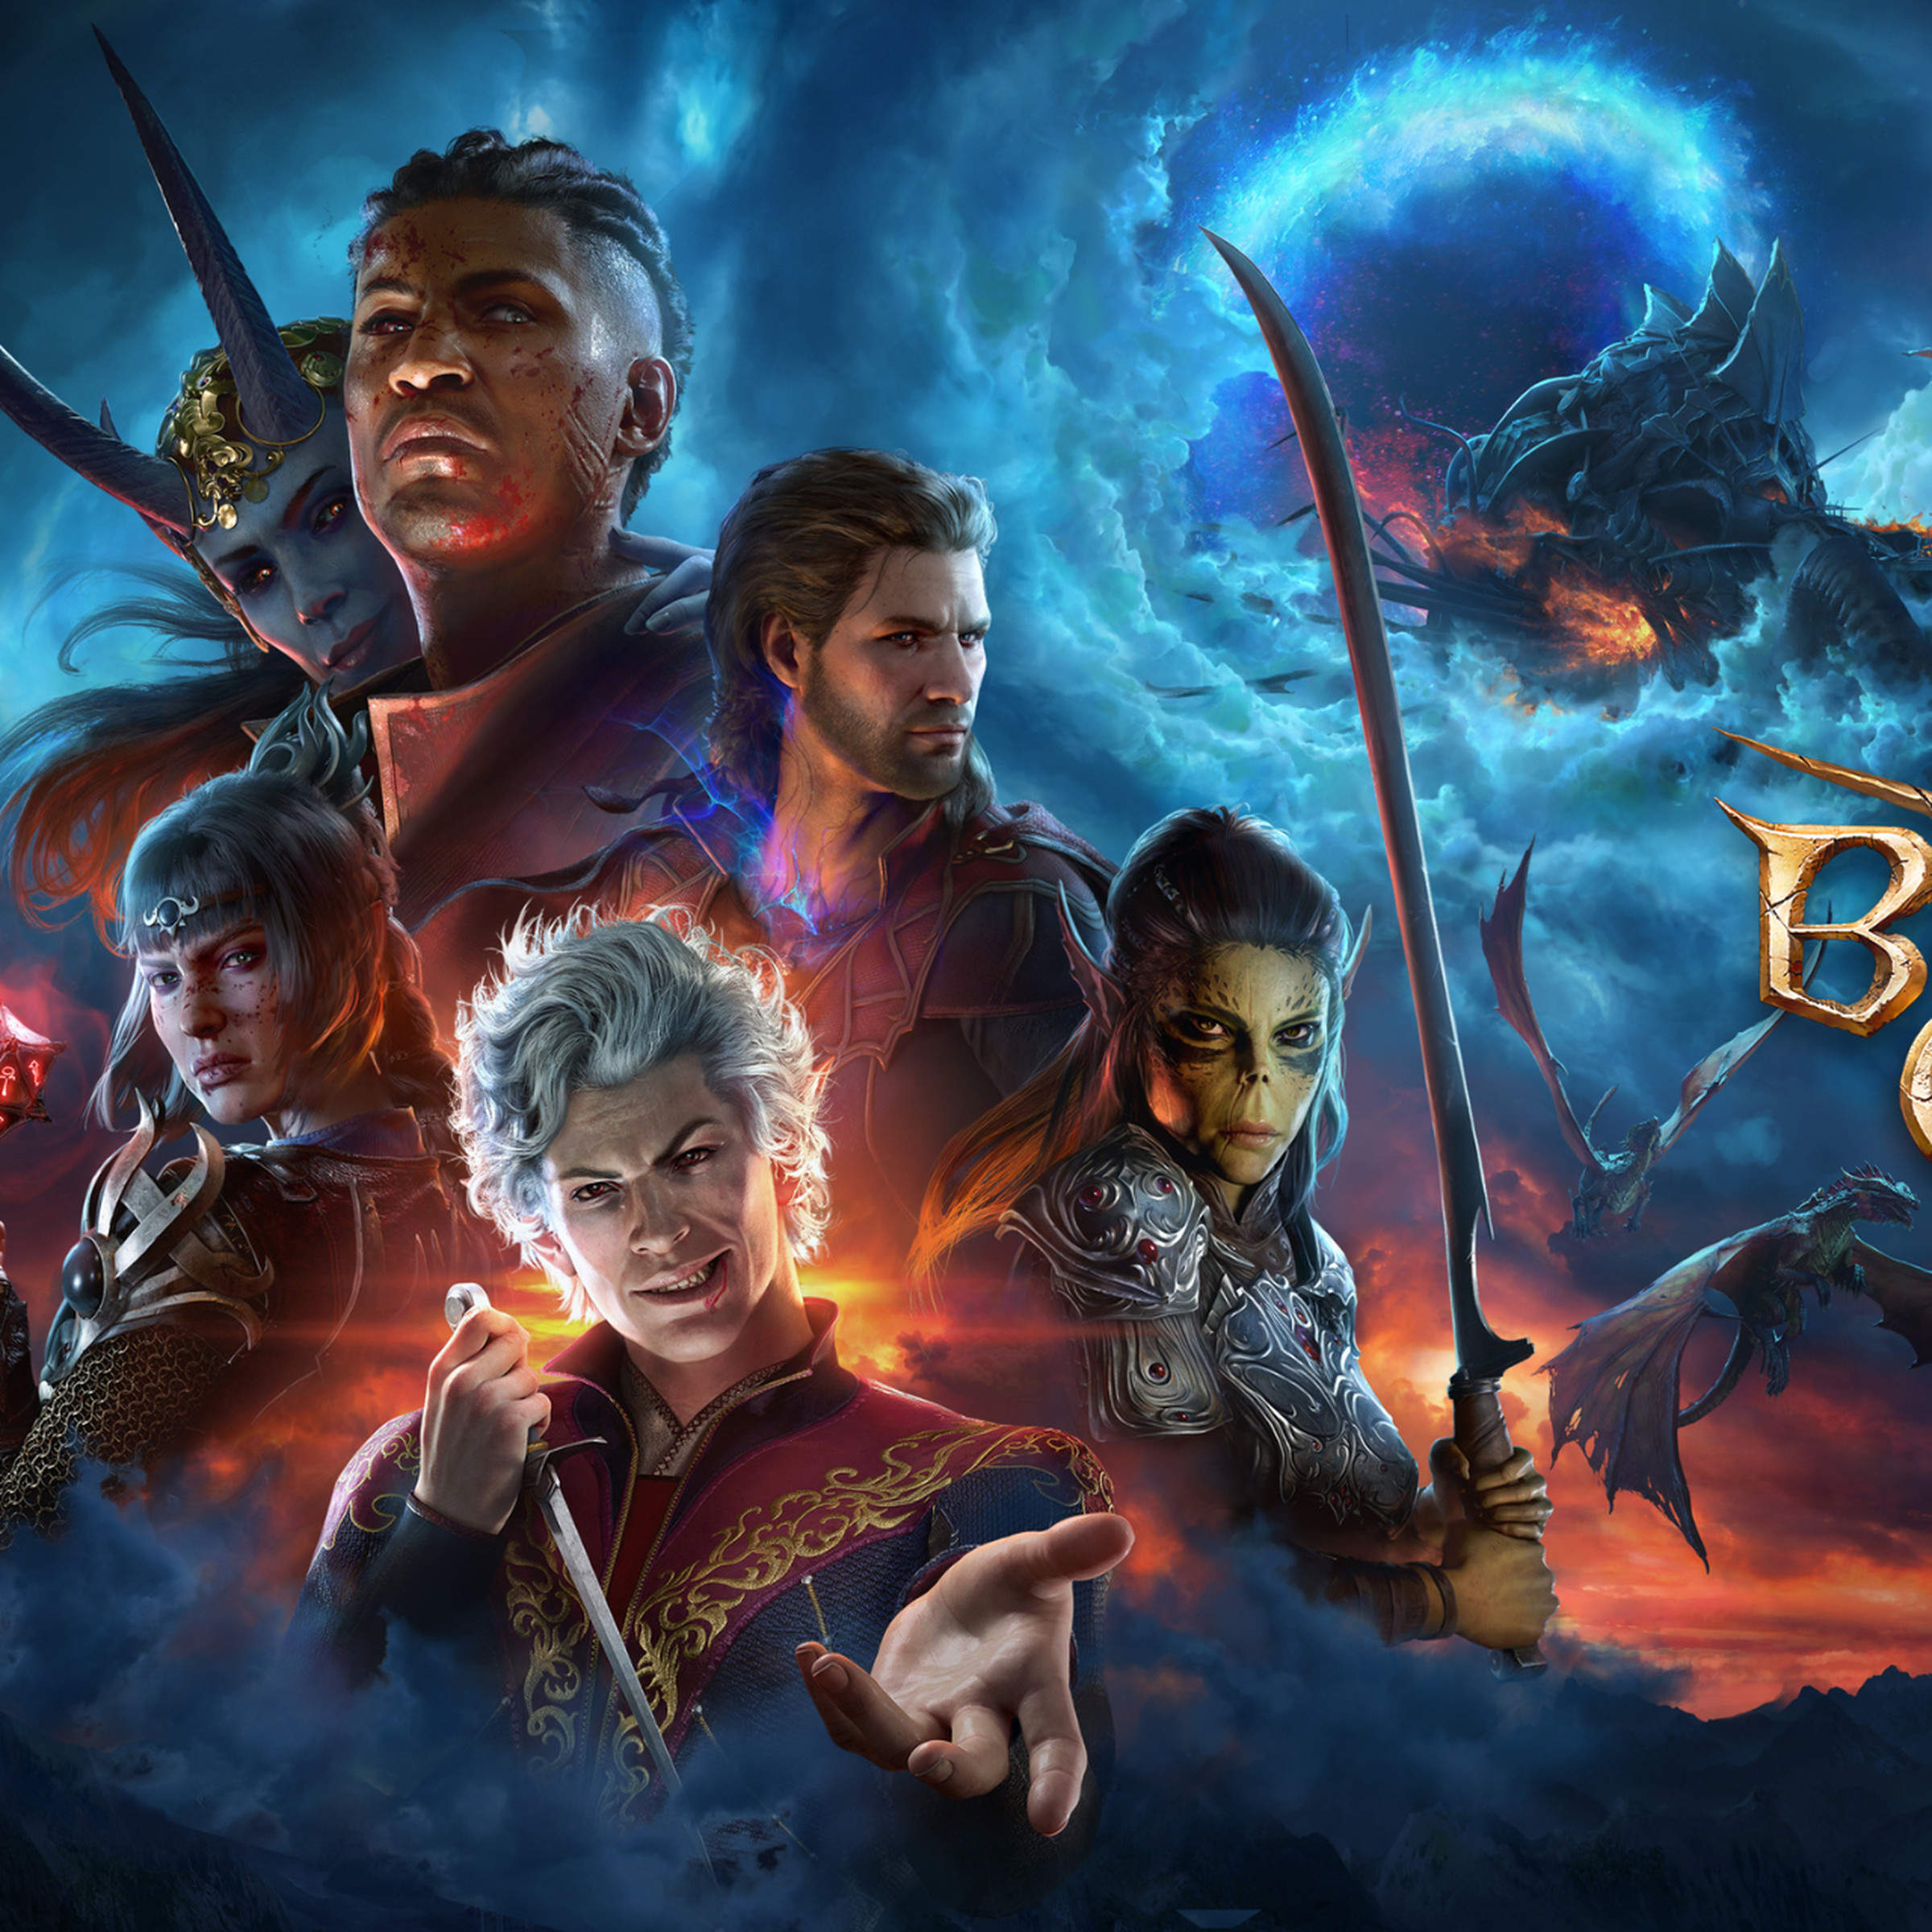 Key art for Baldur’s Gate 3 featuring a composite of five of the game’s companions with a dark blue sky background with the Baldur’s Gate 3 logo to the right.